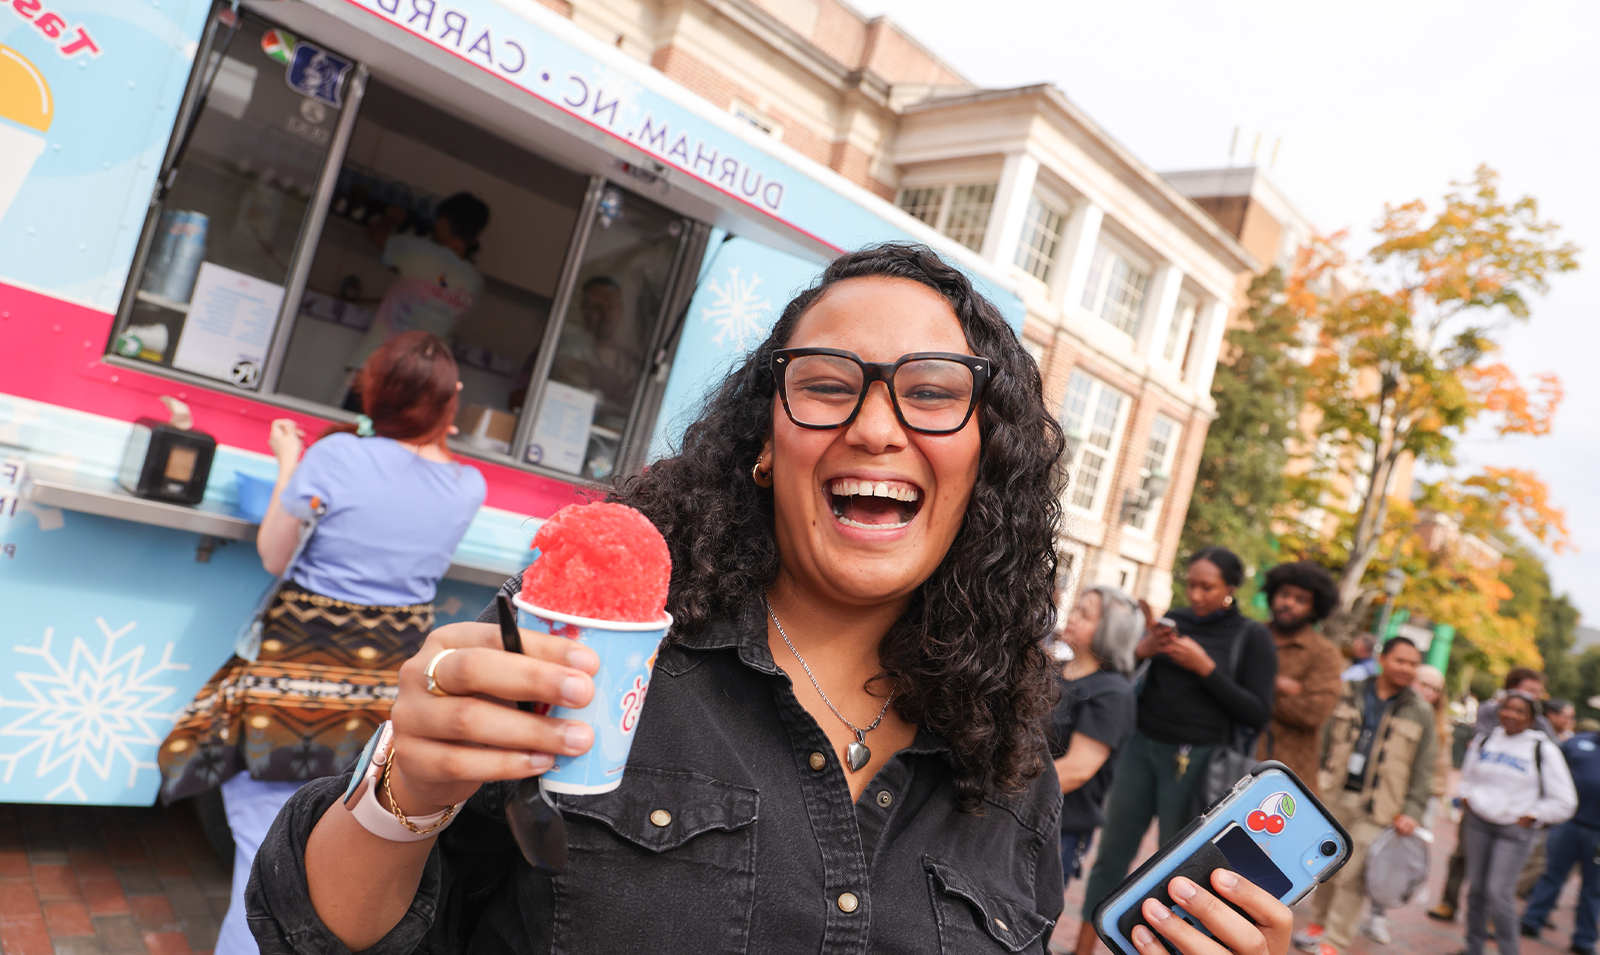 A woman smiling and holding a snowcone.